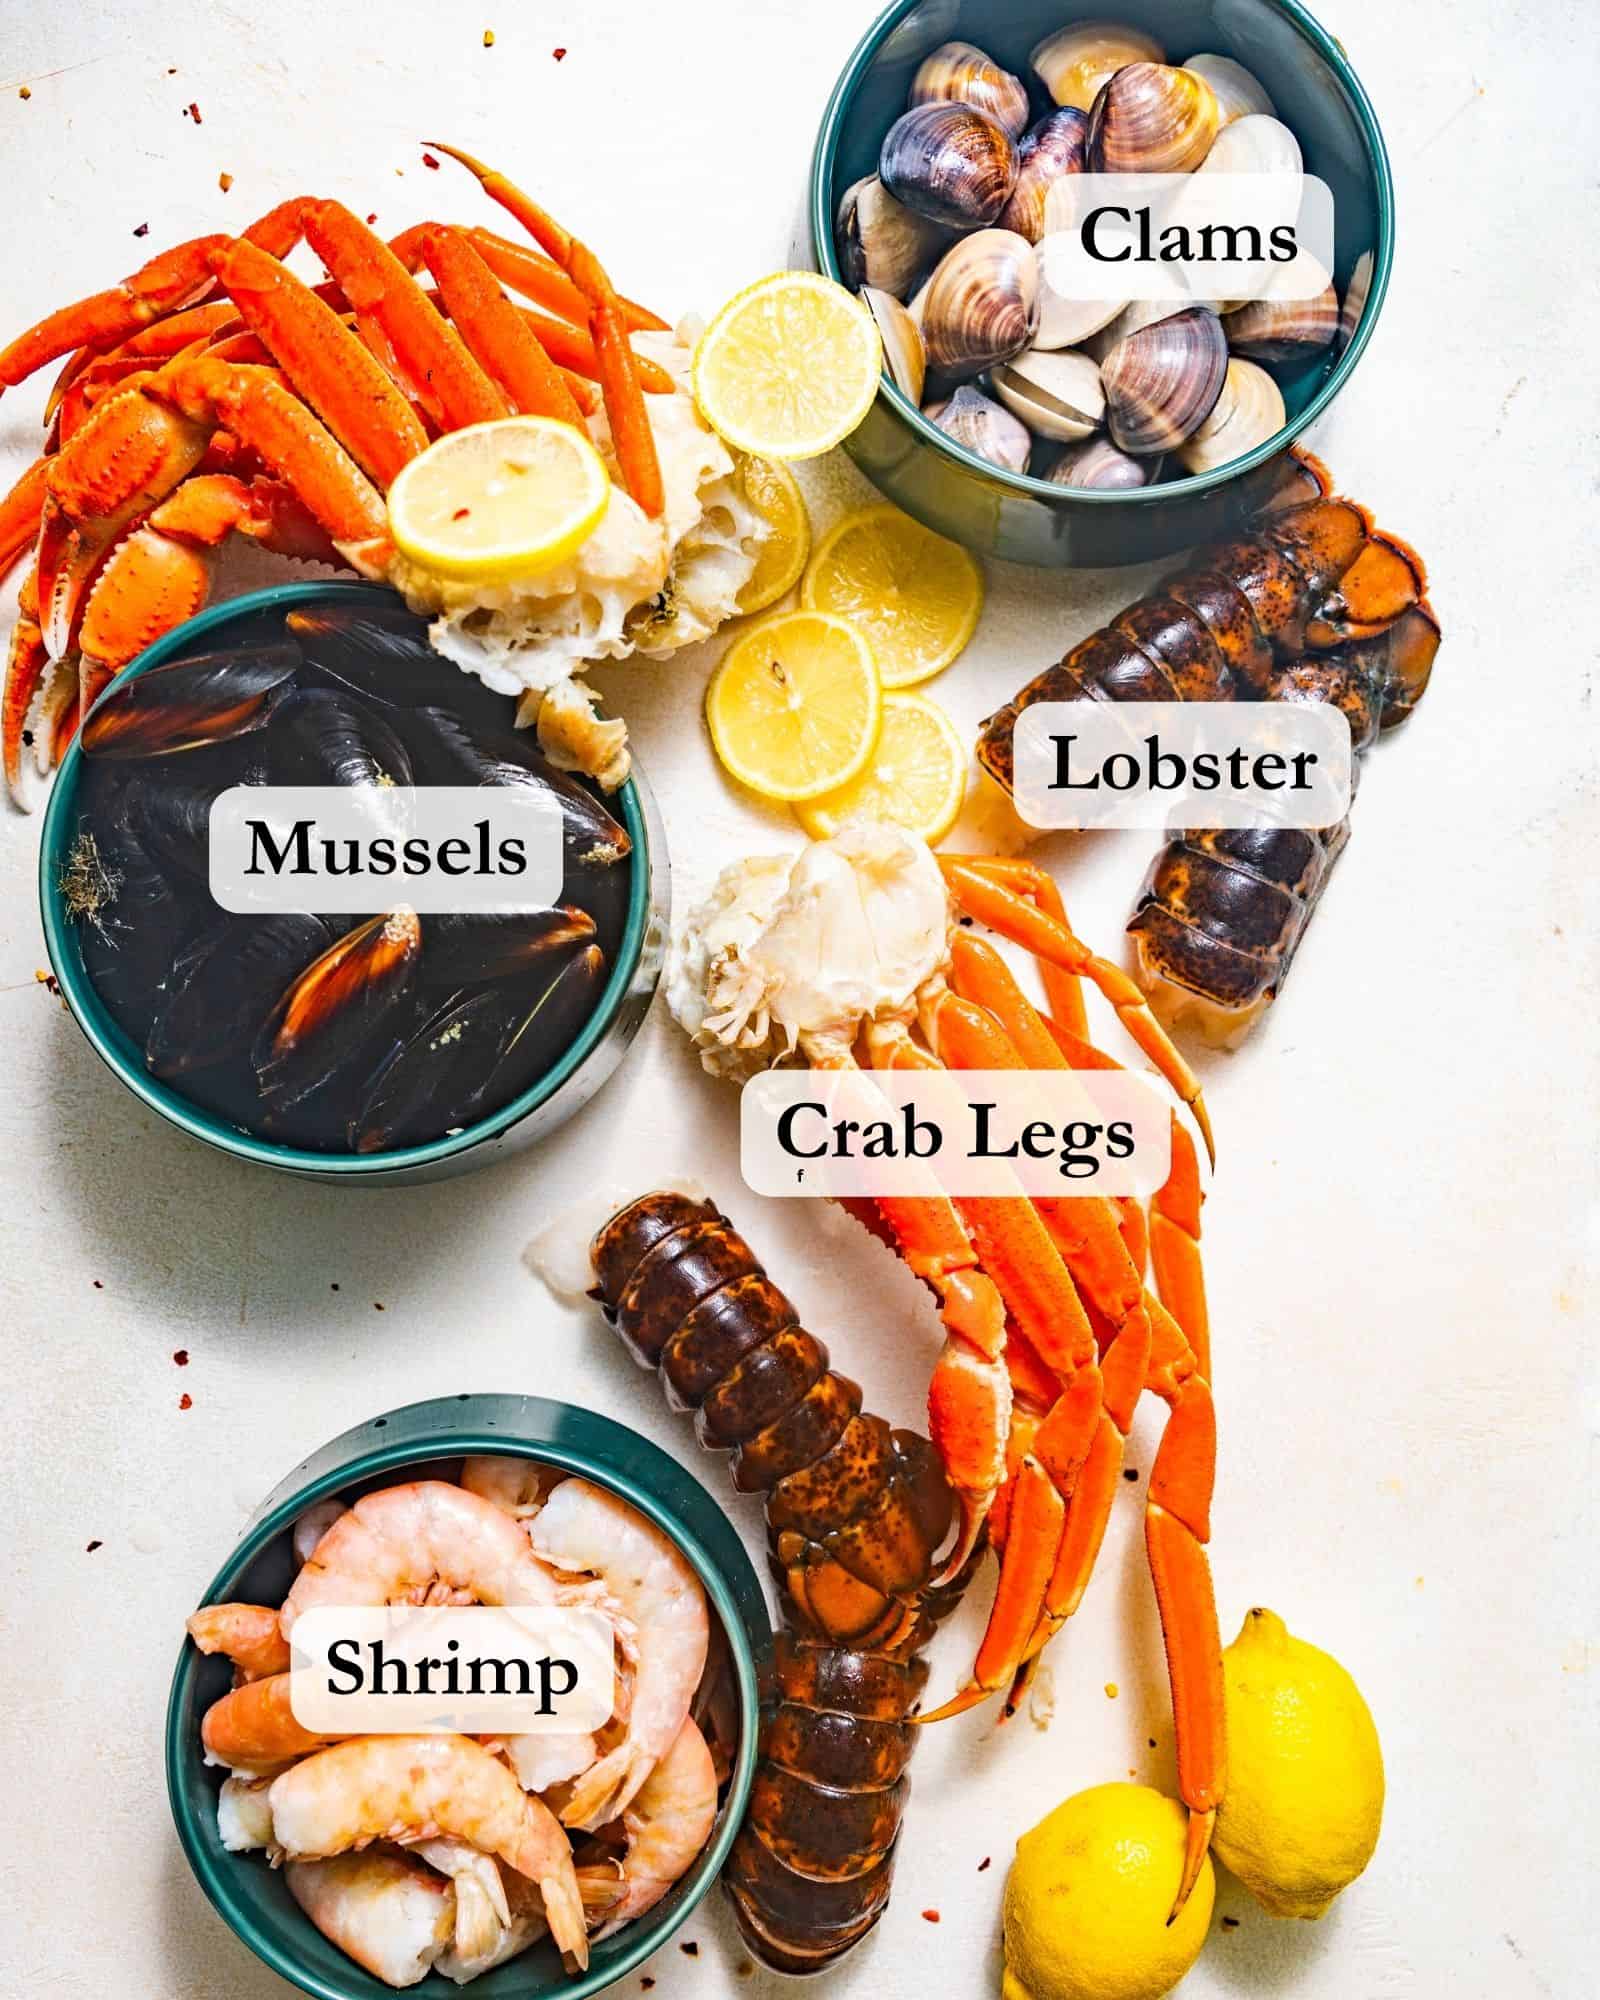 ingredients to make a cajun seafood boil on a white surface - shrimp, lobster, crab legs, mussels, and clams.